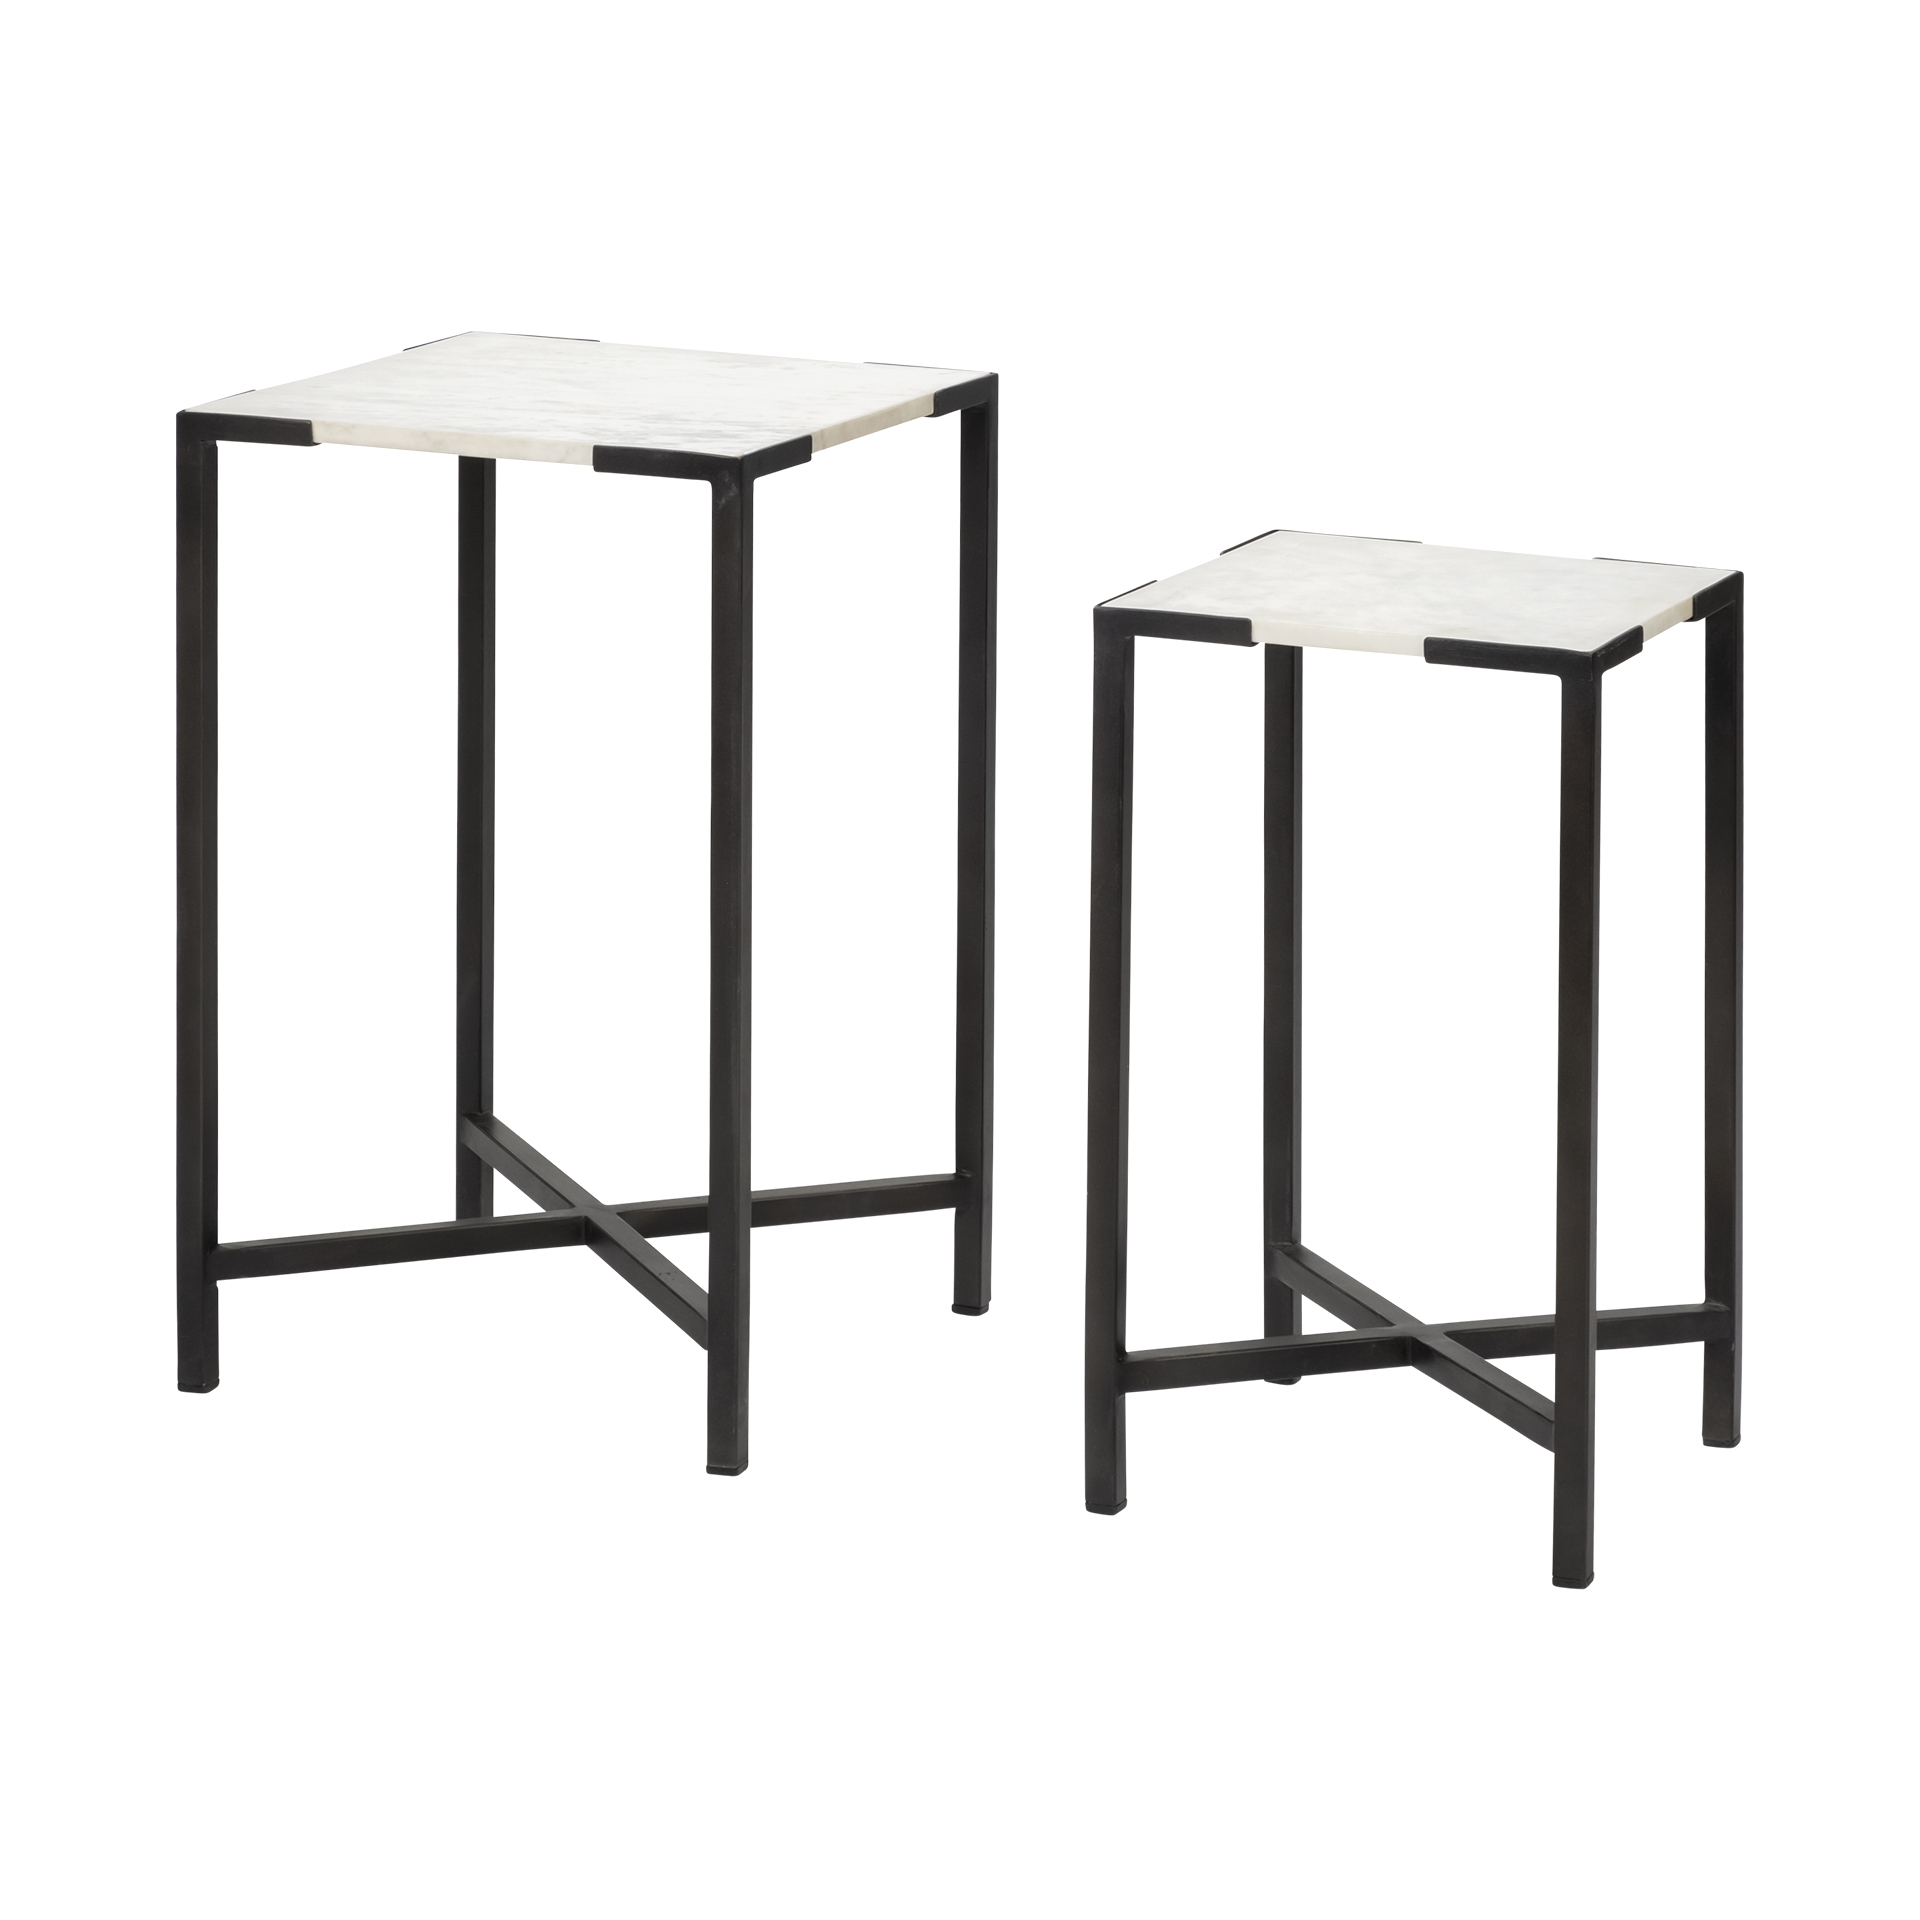 White Marble Square Top Accent Tables with Black Iron Frame